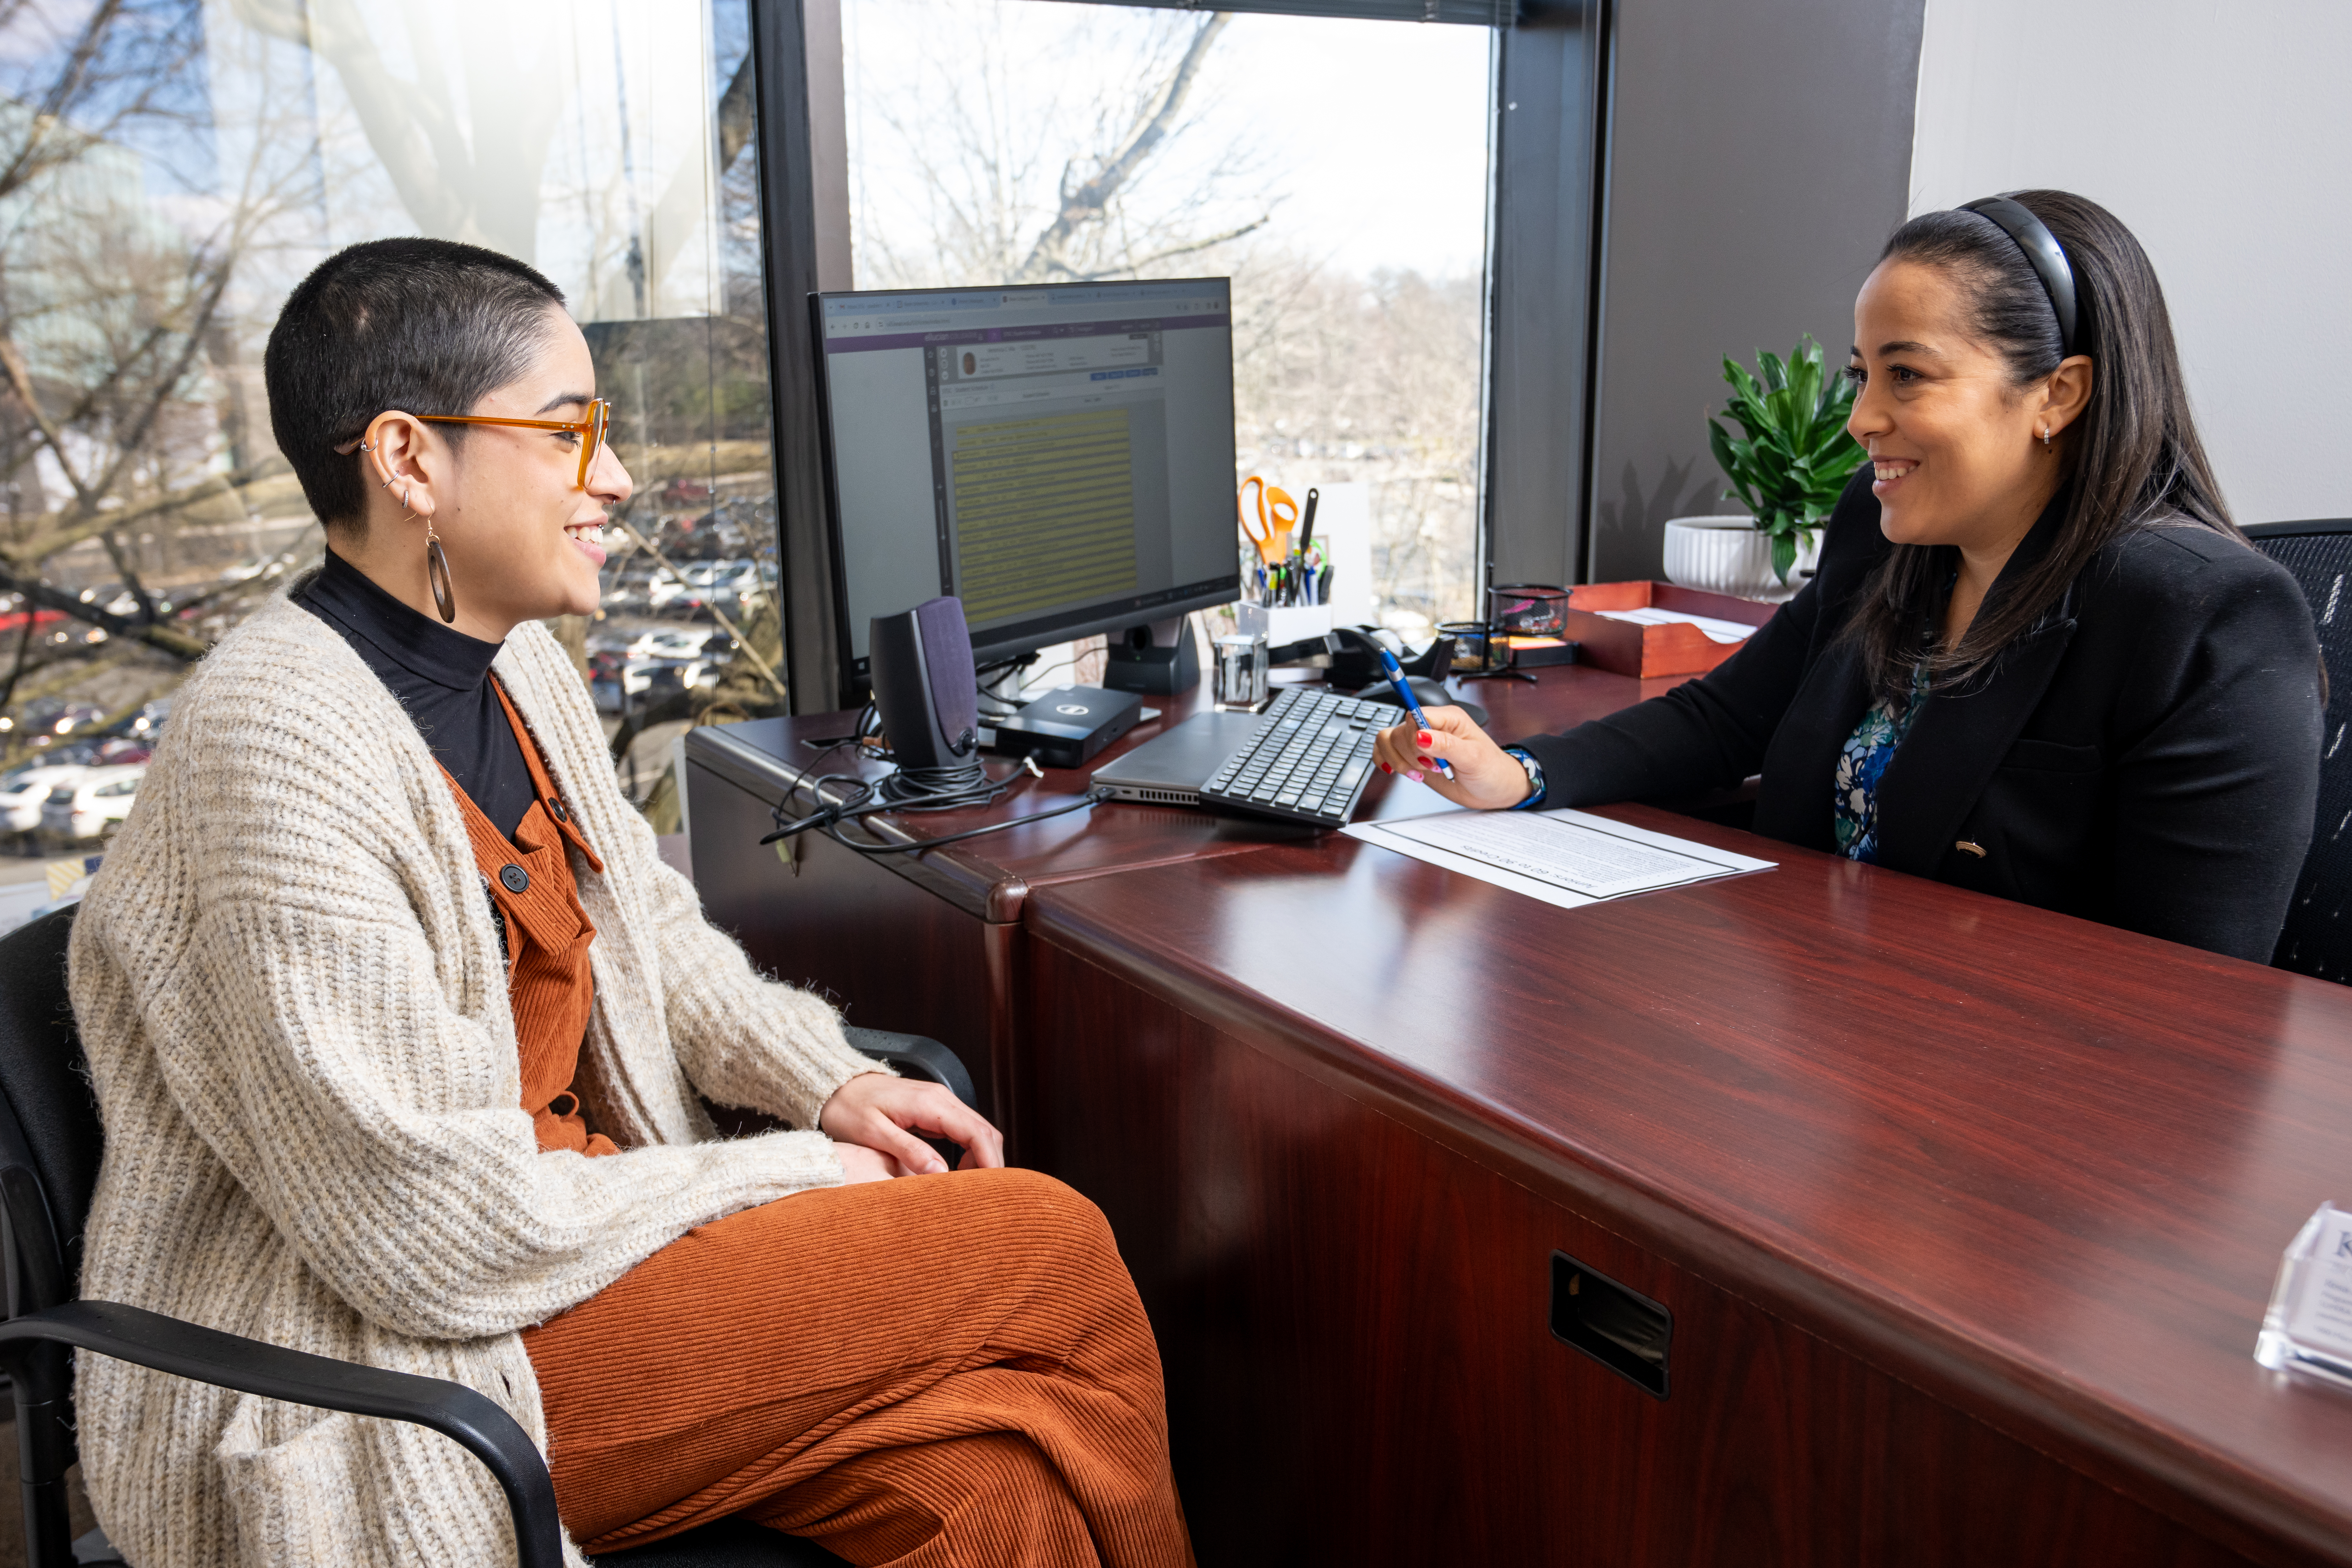 A guidance counselor meets with a student